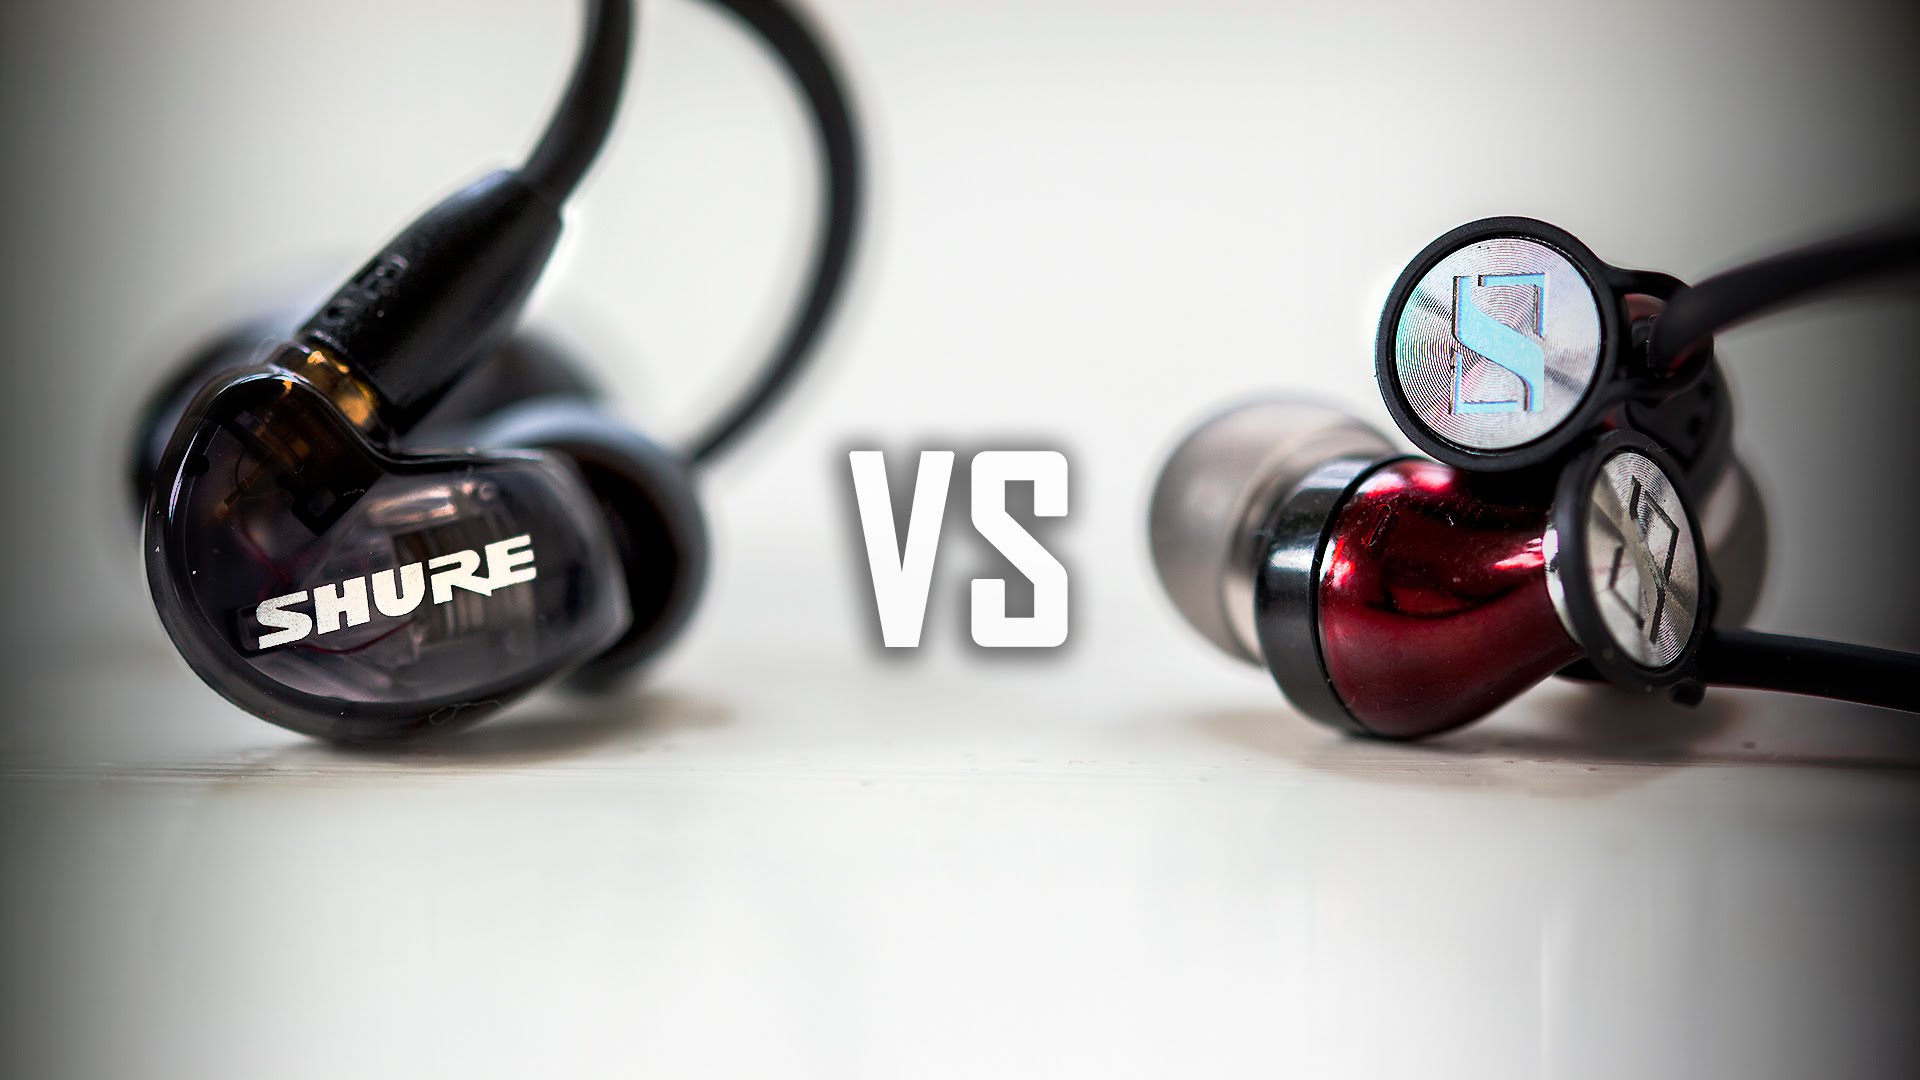 The Top 15 Best Bass Earbuds in 2020 